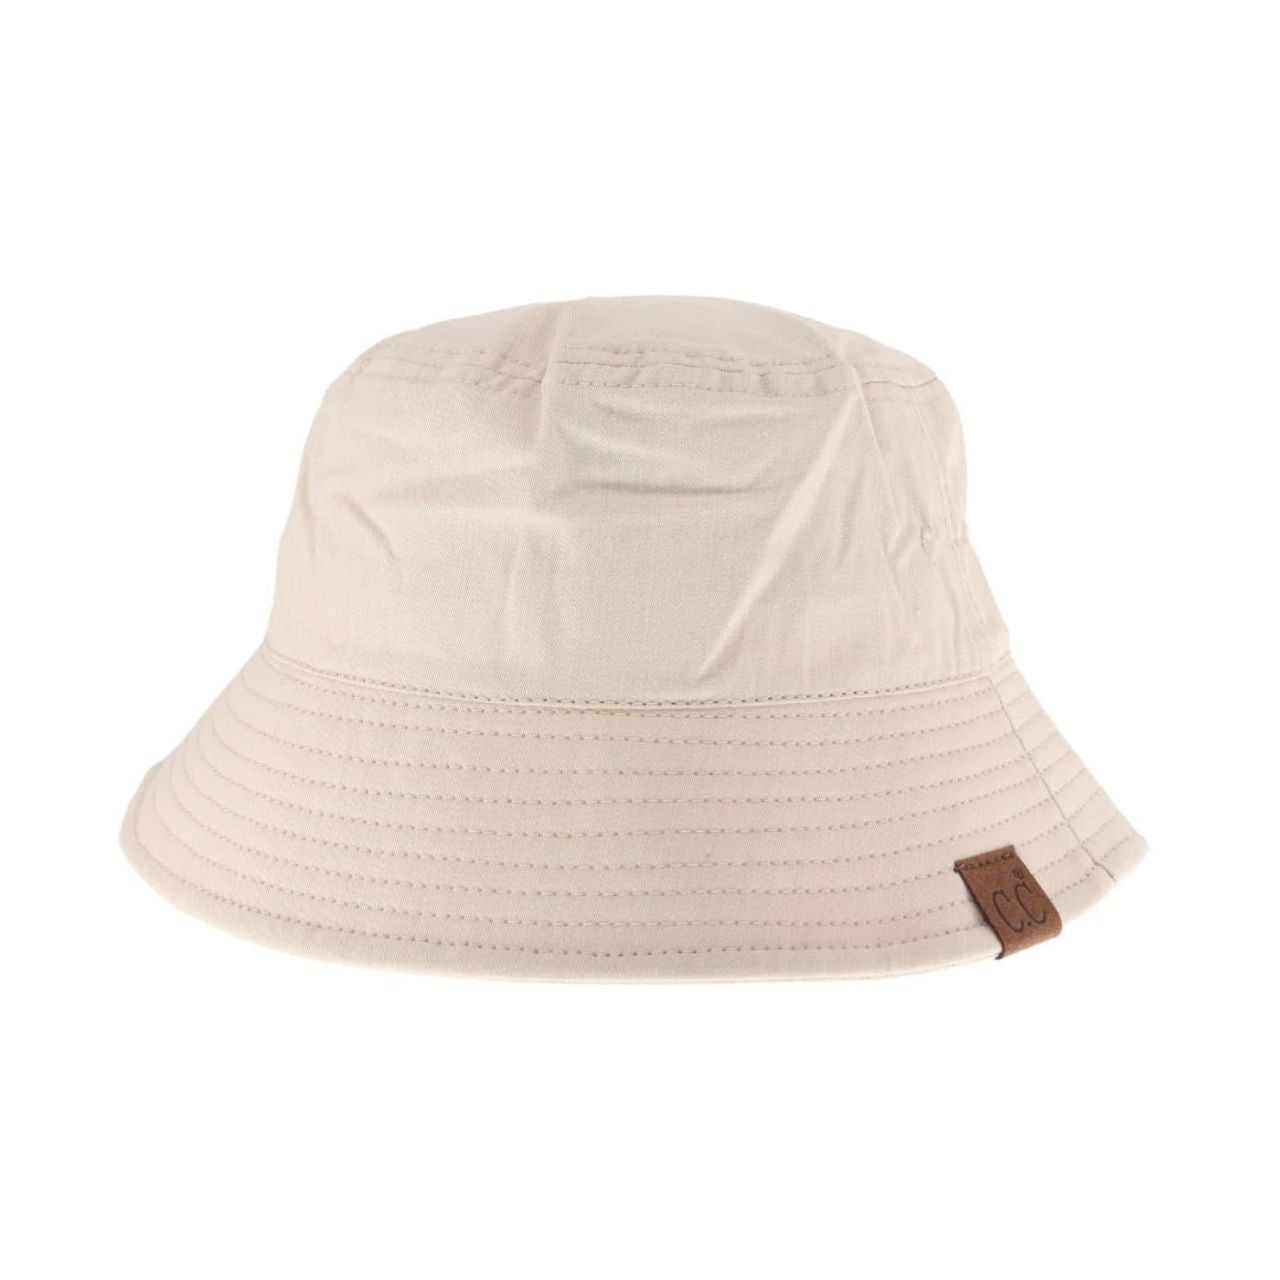 Solid Cotton C.C Bucket Hat - The Graphic Tee